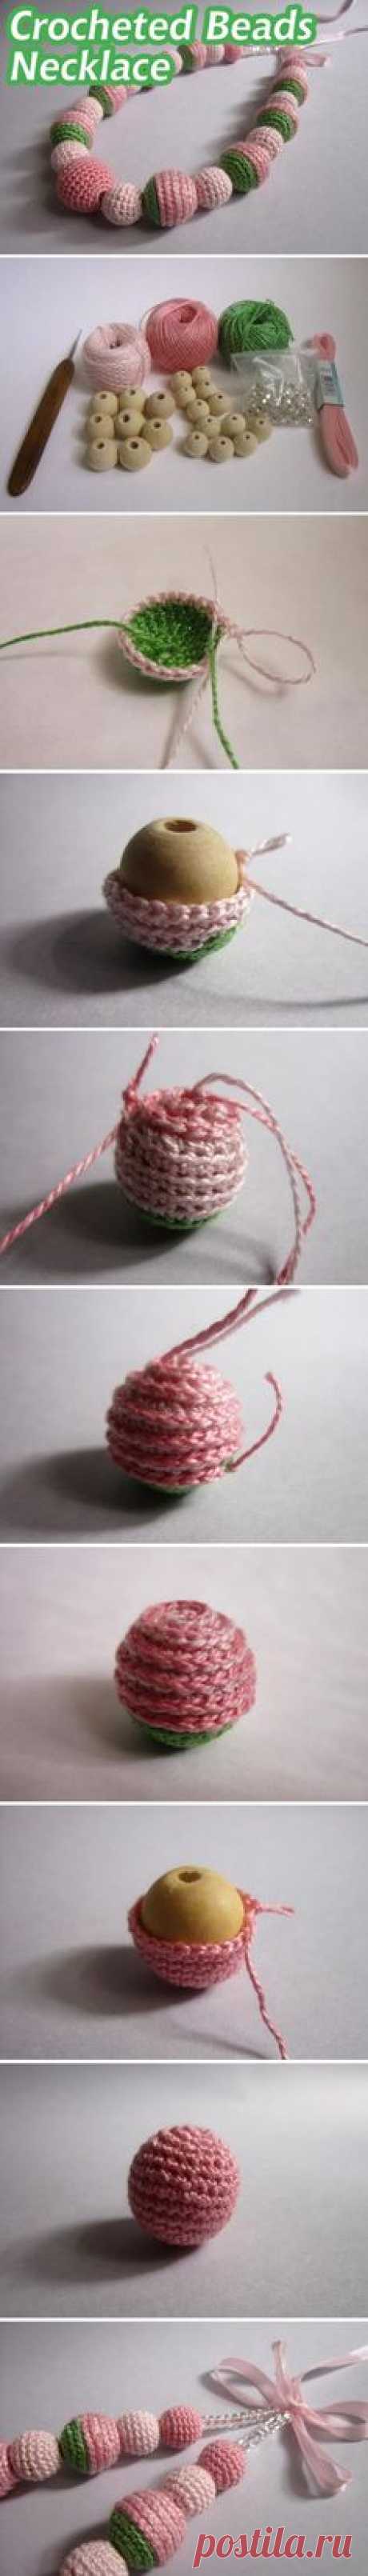 Crocheted Beads Necklace Tutorial